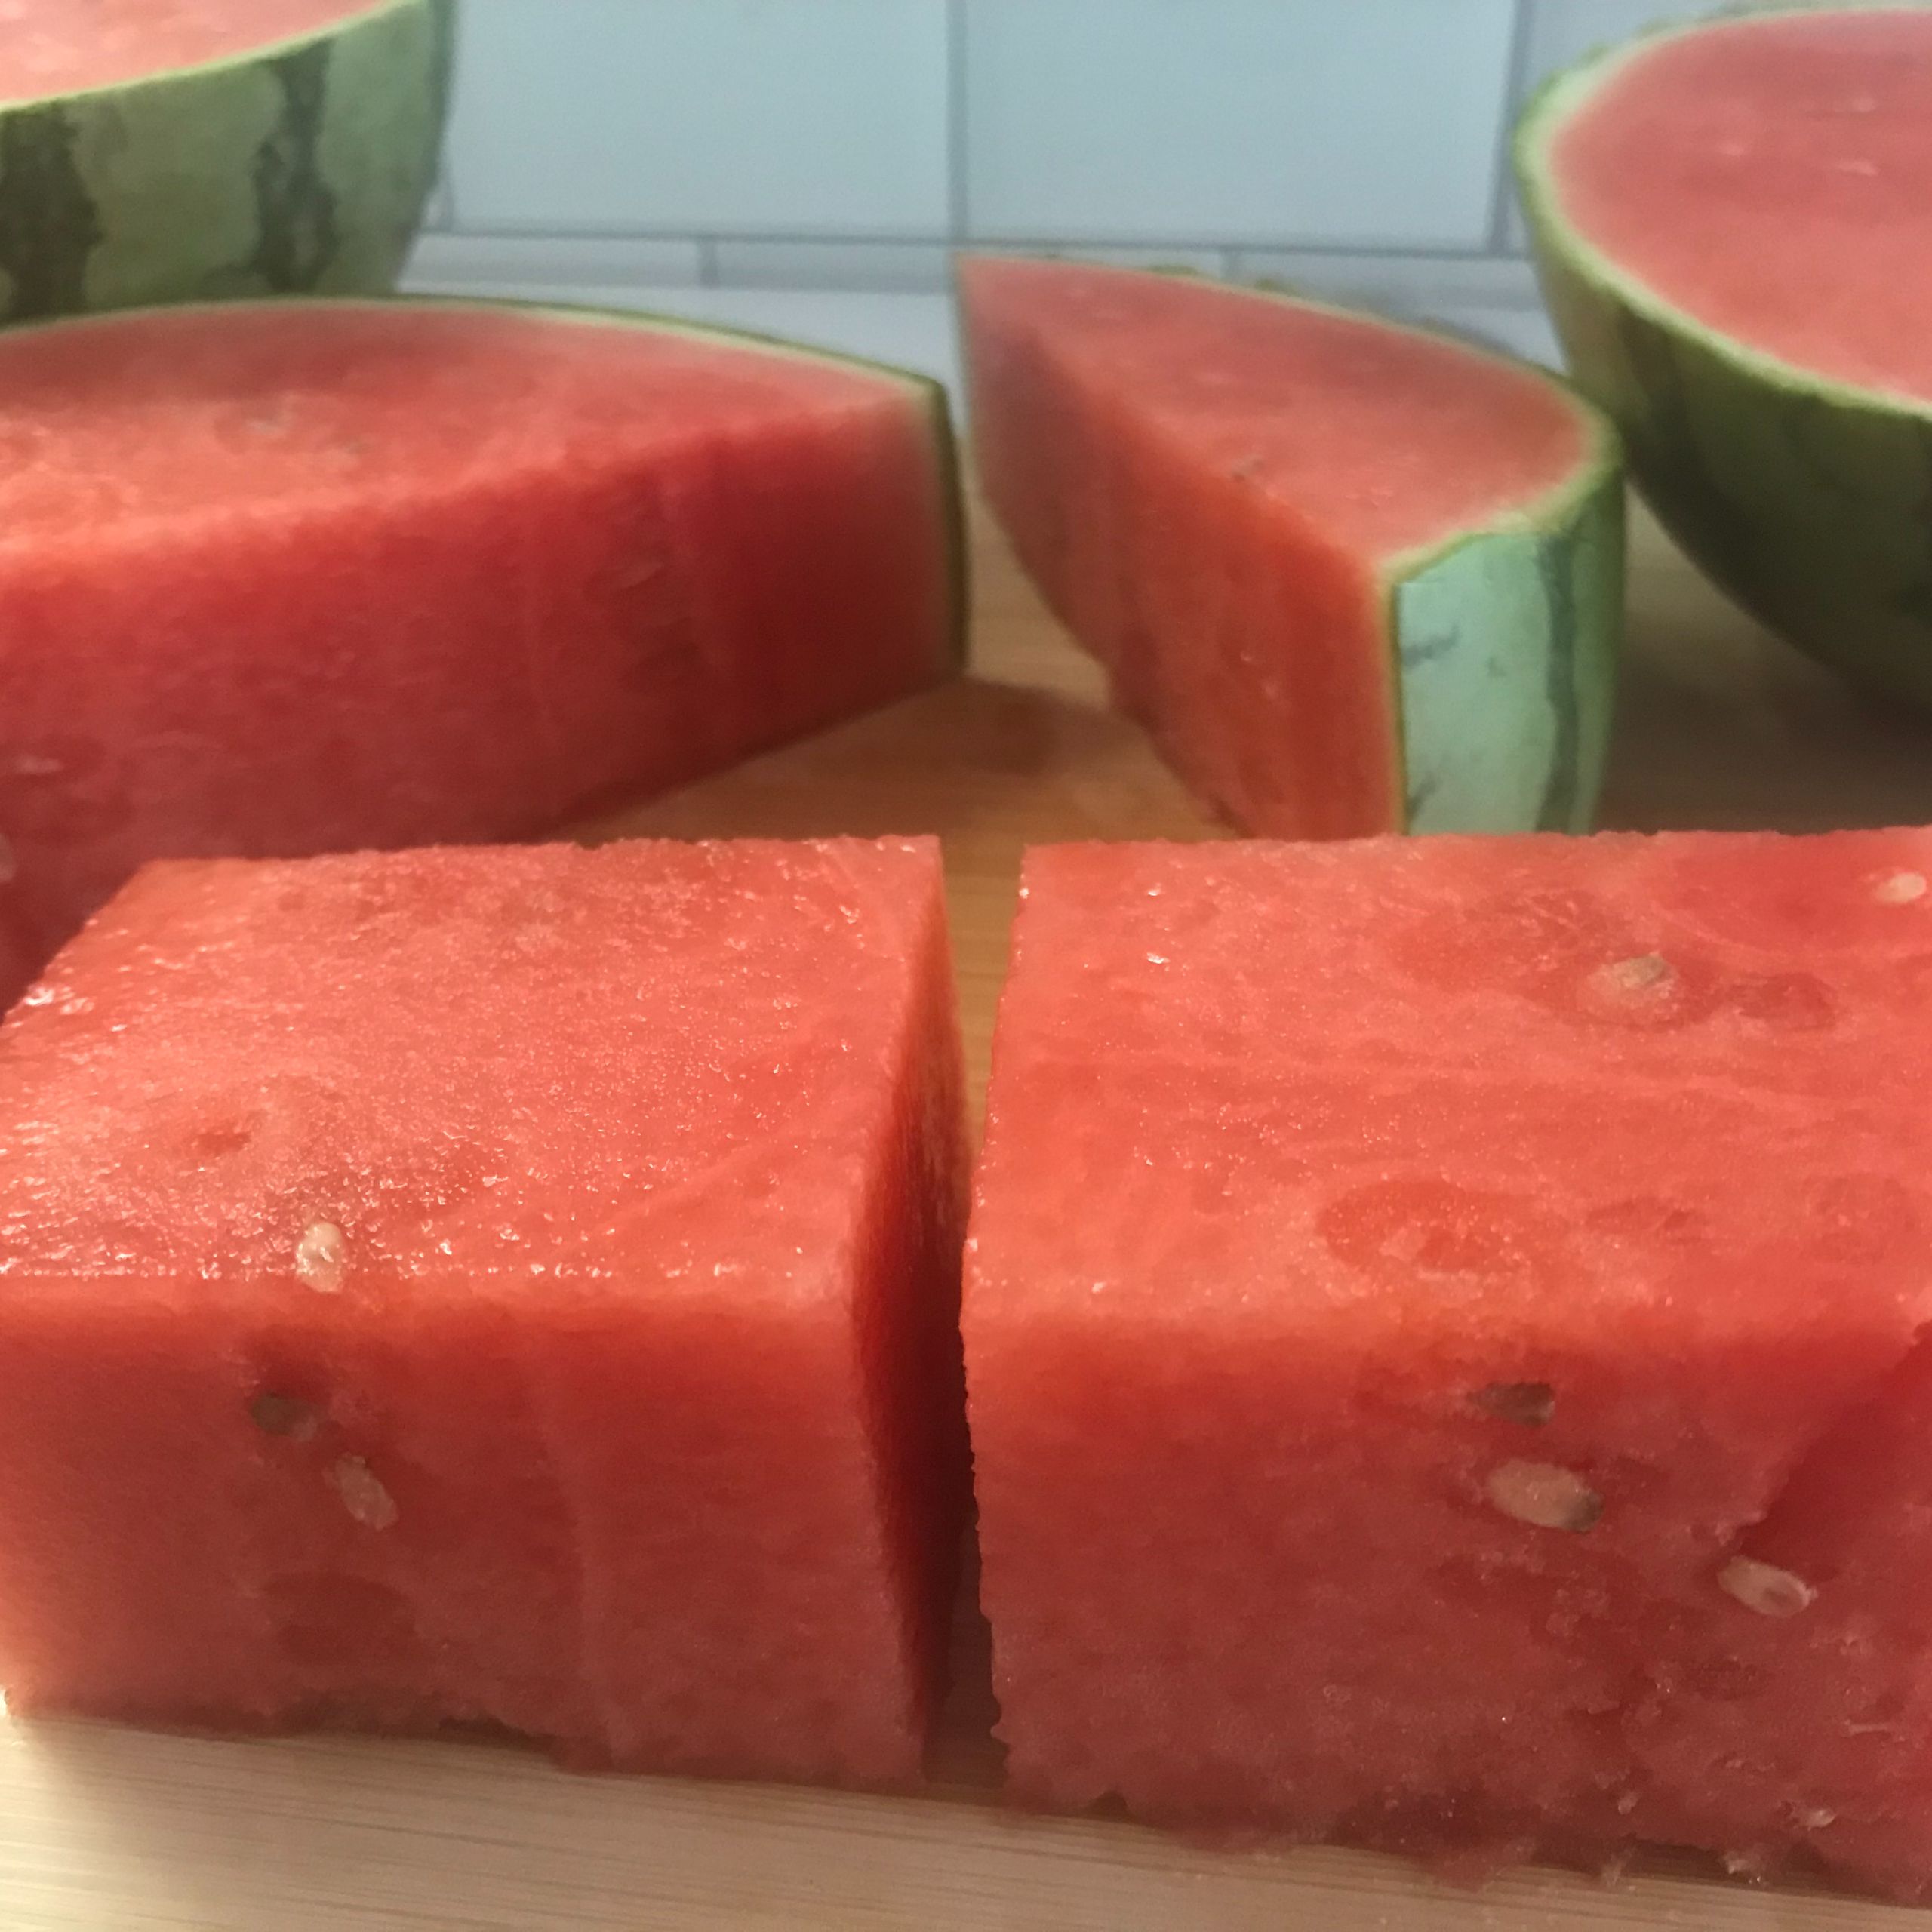 watermelon slabs cut into rectangles